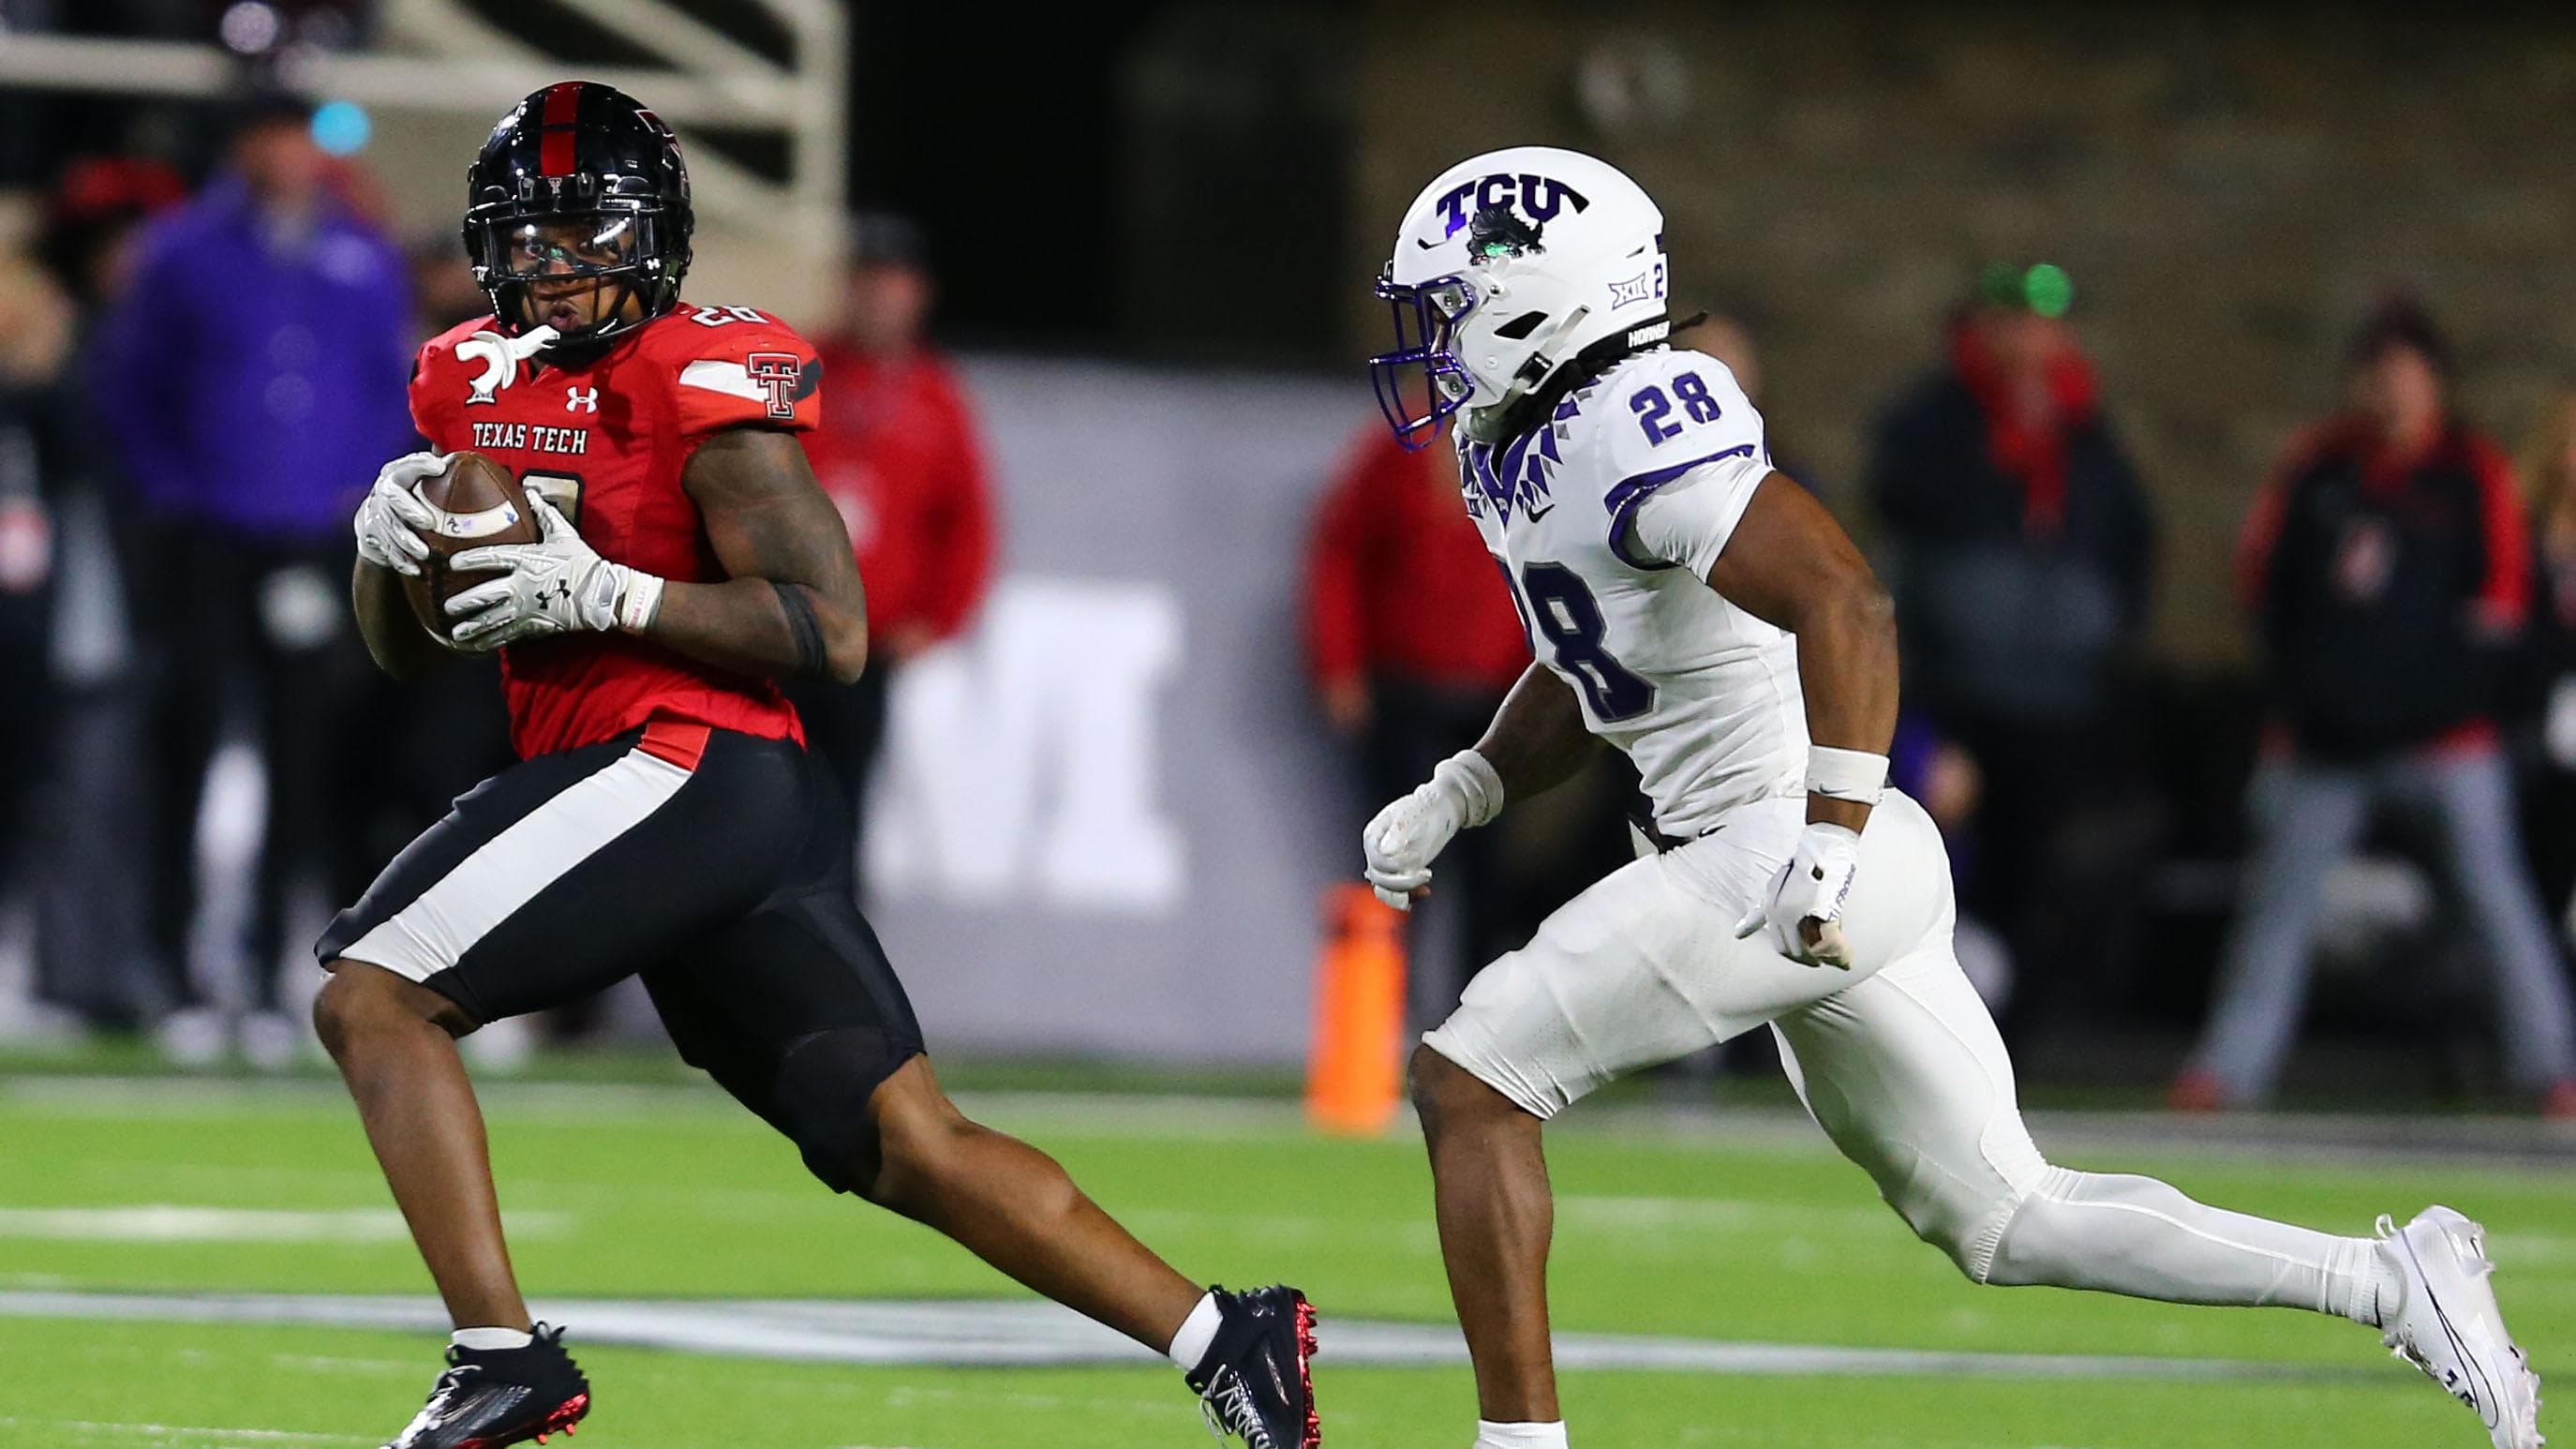 Texas Tech Red Raiders running back Tahj Brooks (28) rushes while being chased by TCU defender Millard Bradford.